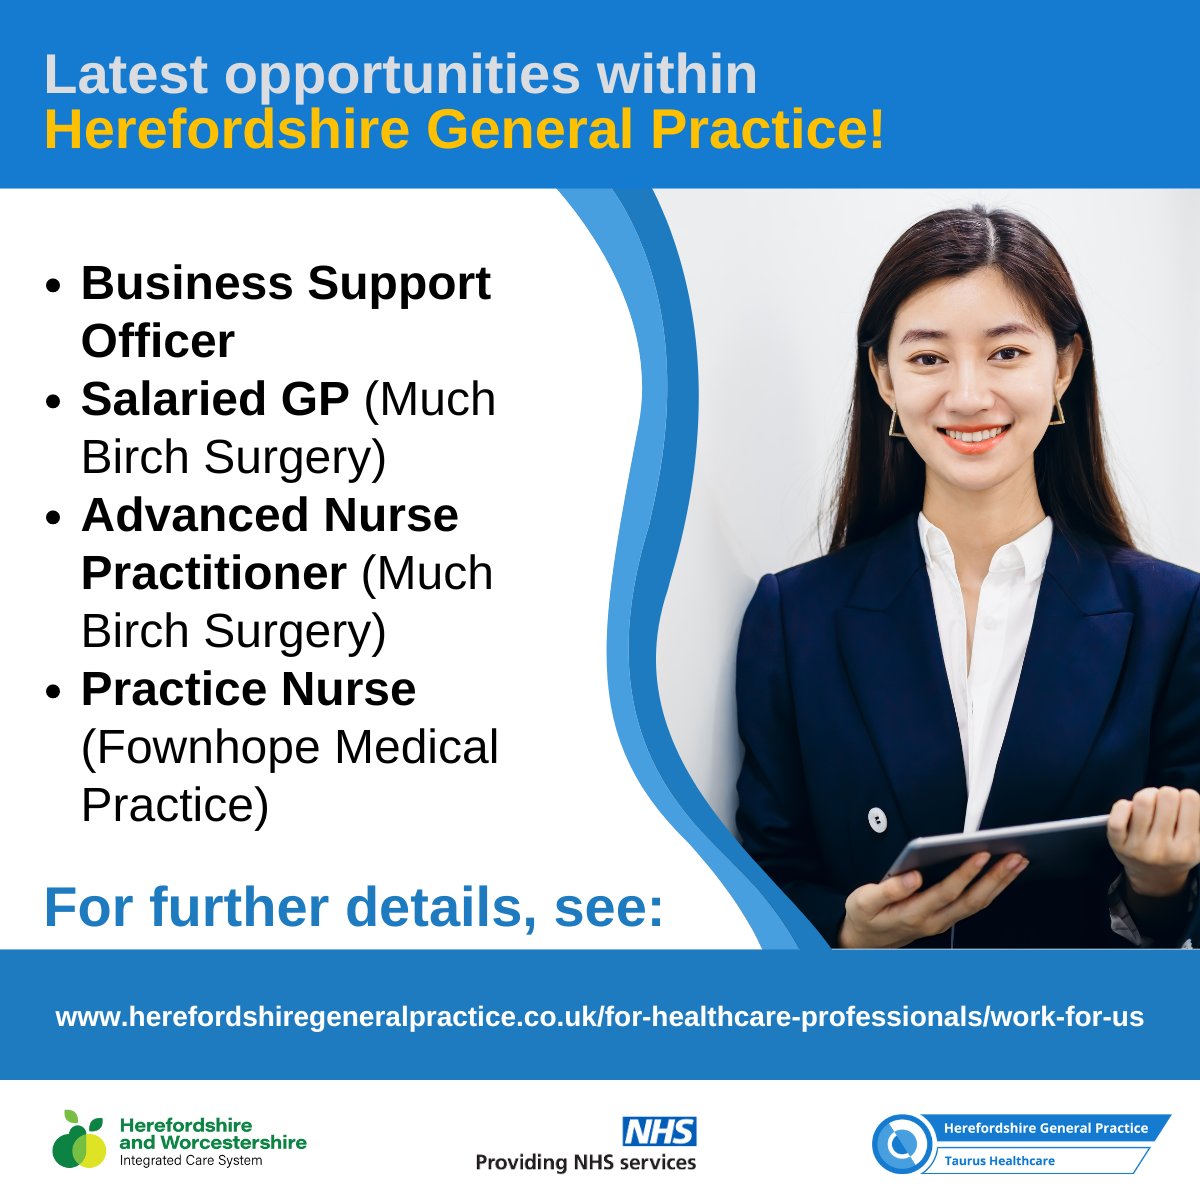 Check out the latest vacancies within Herefordshire General Practice. For further details and to apply via NHS jobs, please visit our webpage: herefordshiregeneralpractice.co.uk/for-healthcare…